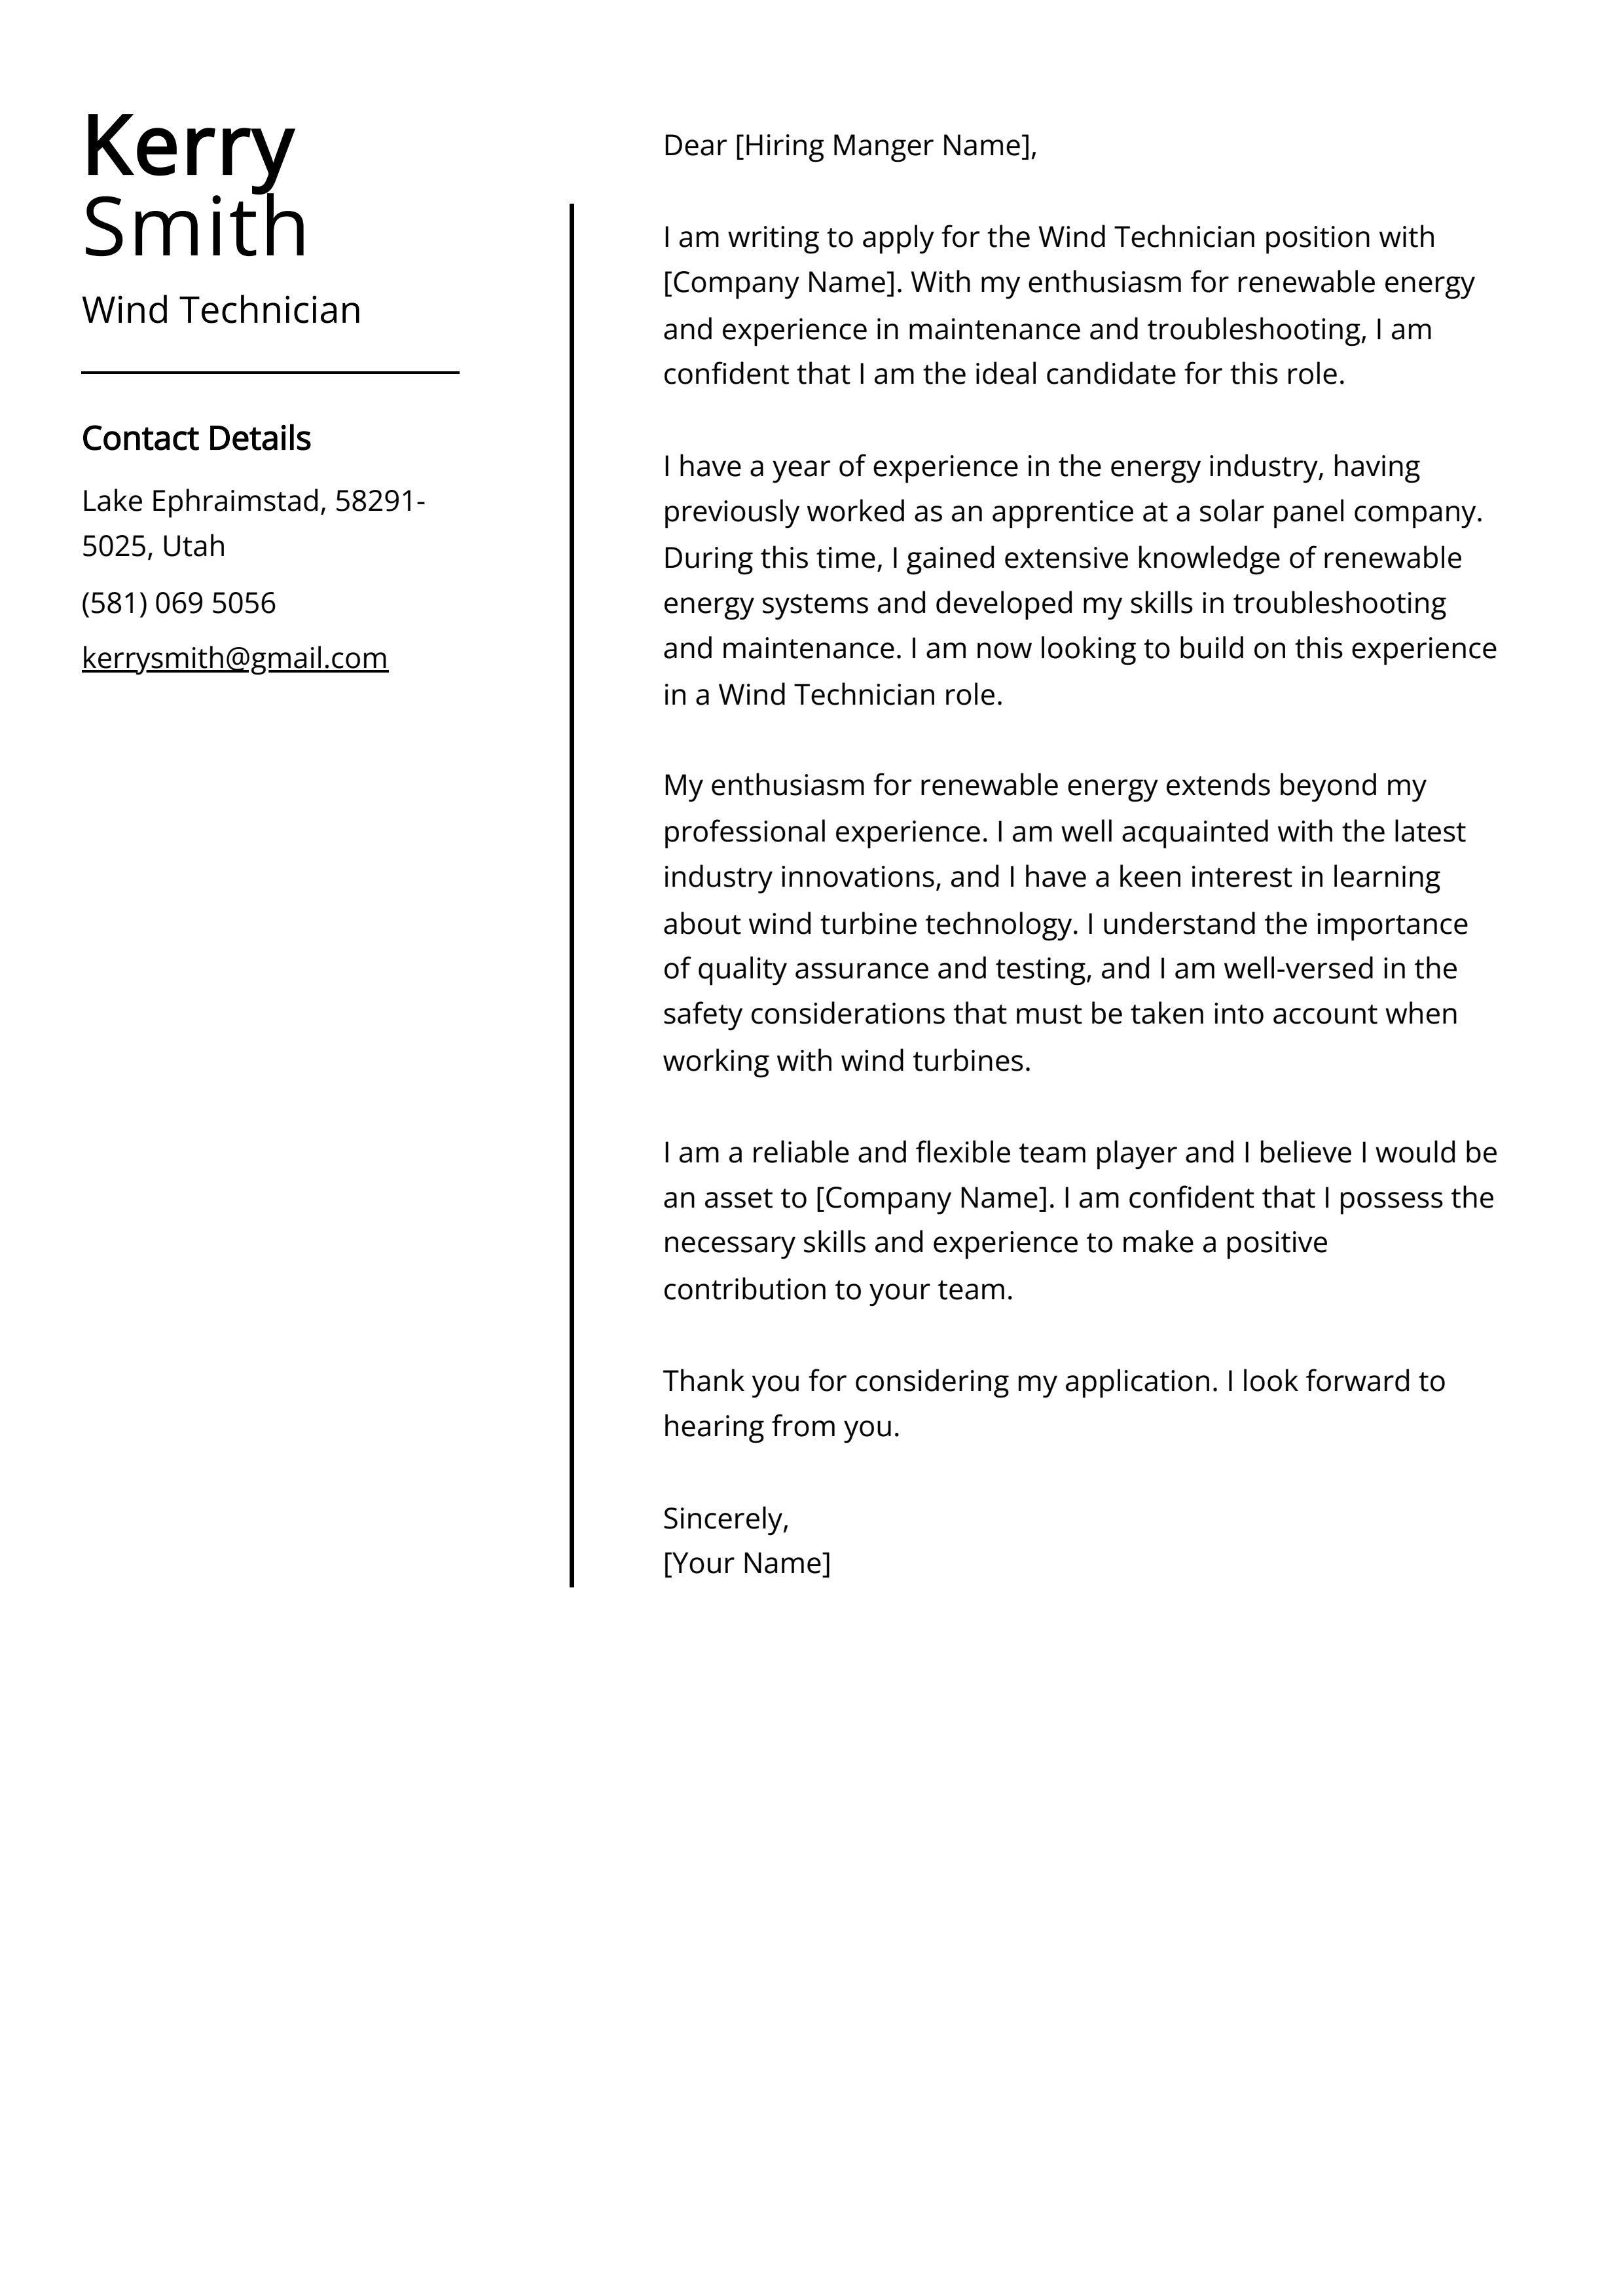 Wind Technician Cover Letter Example